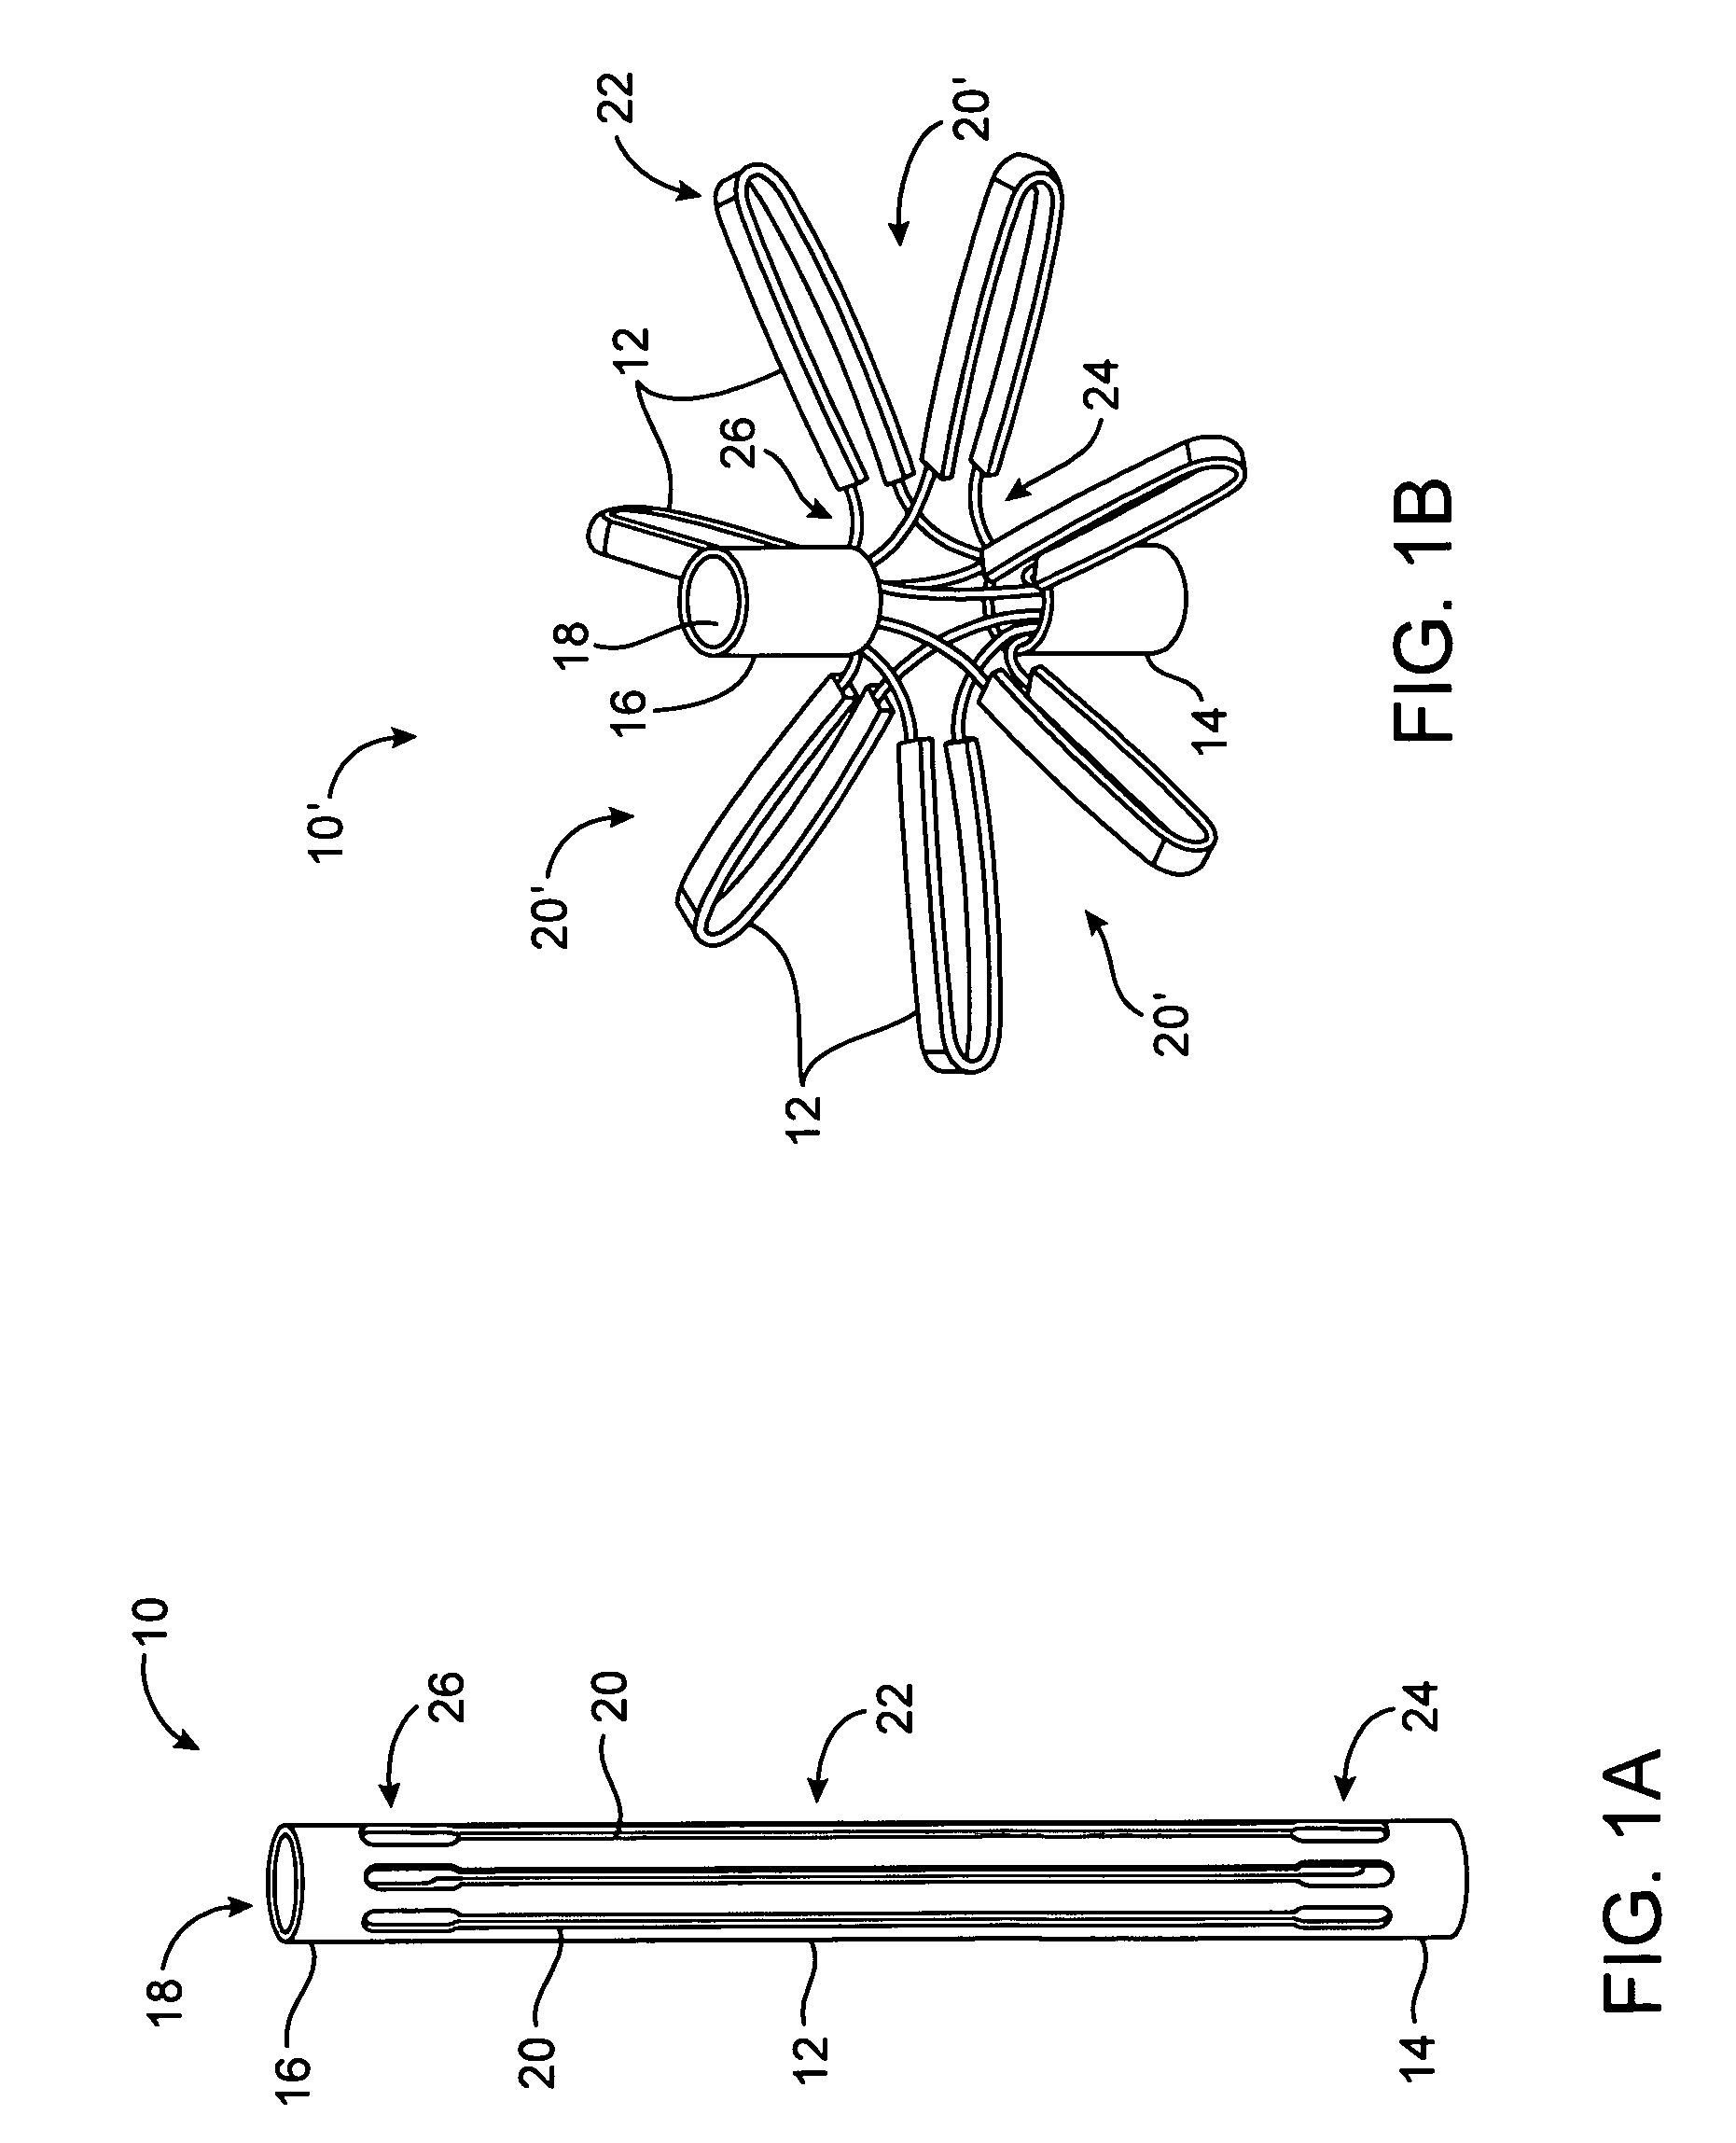 System for optimizing anchoring force